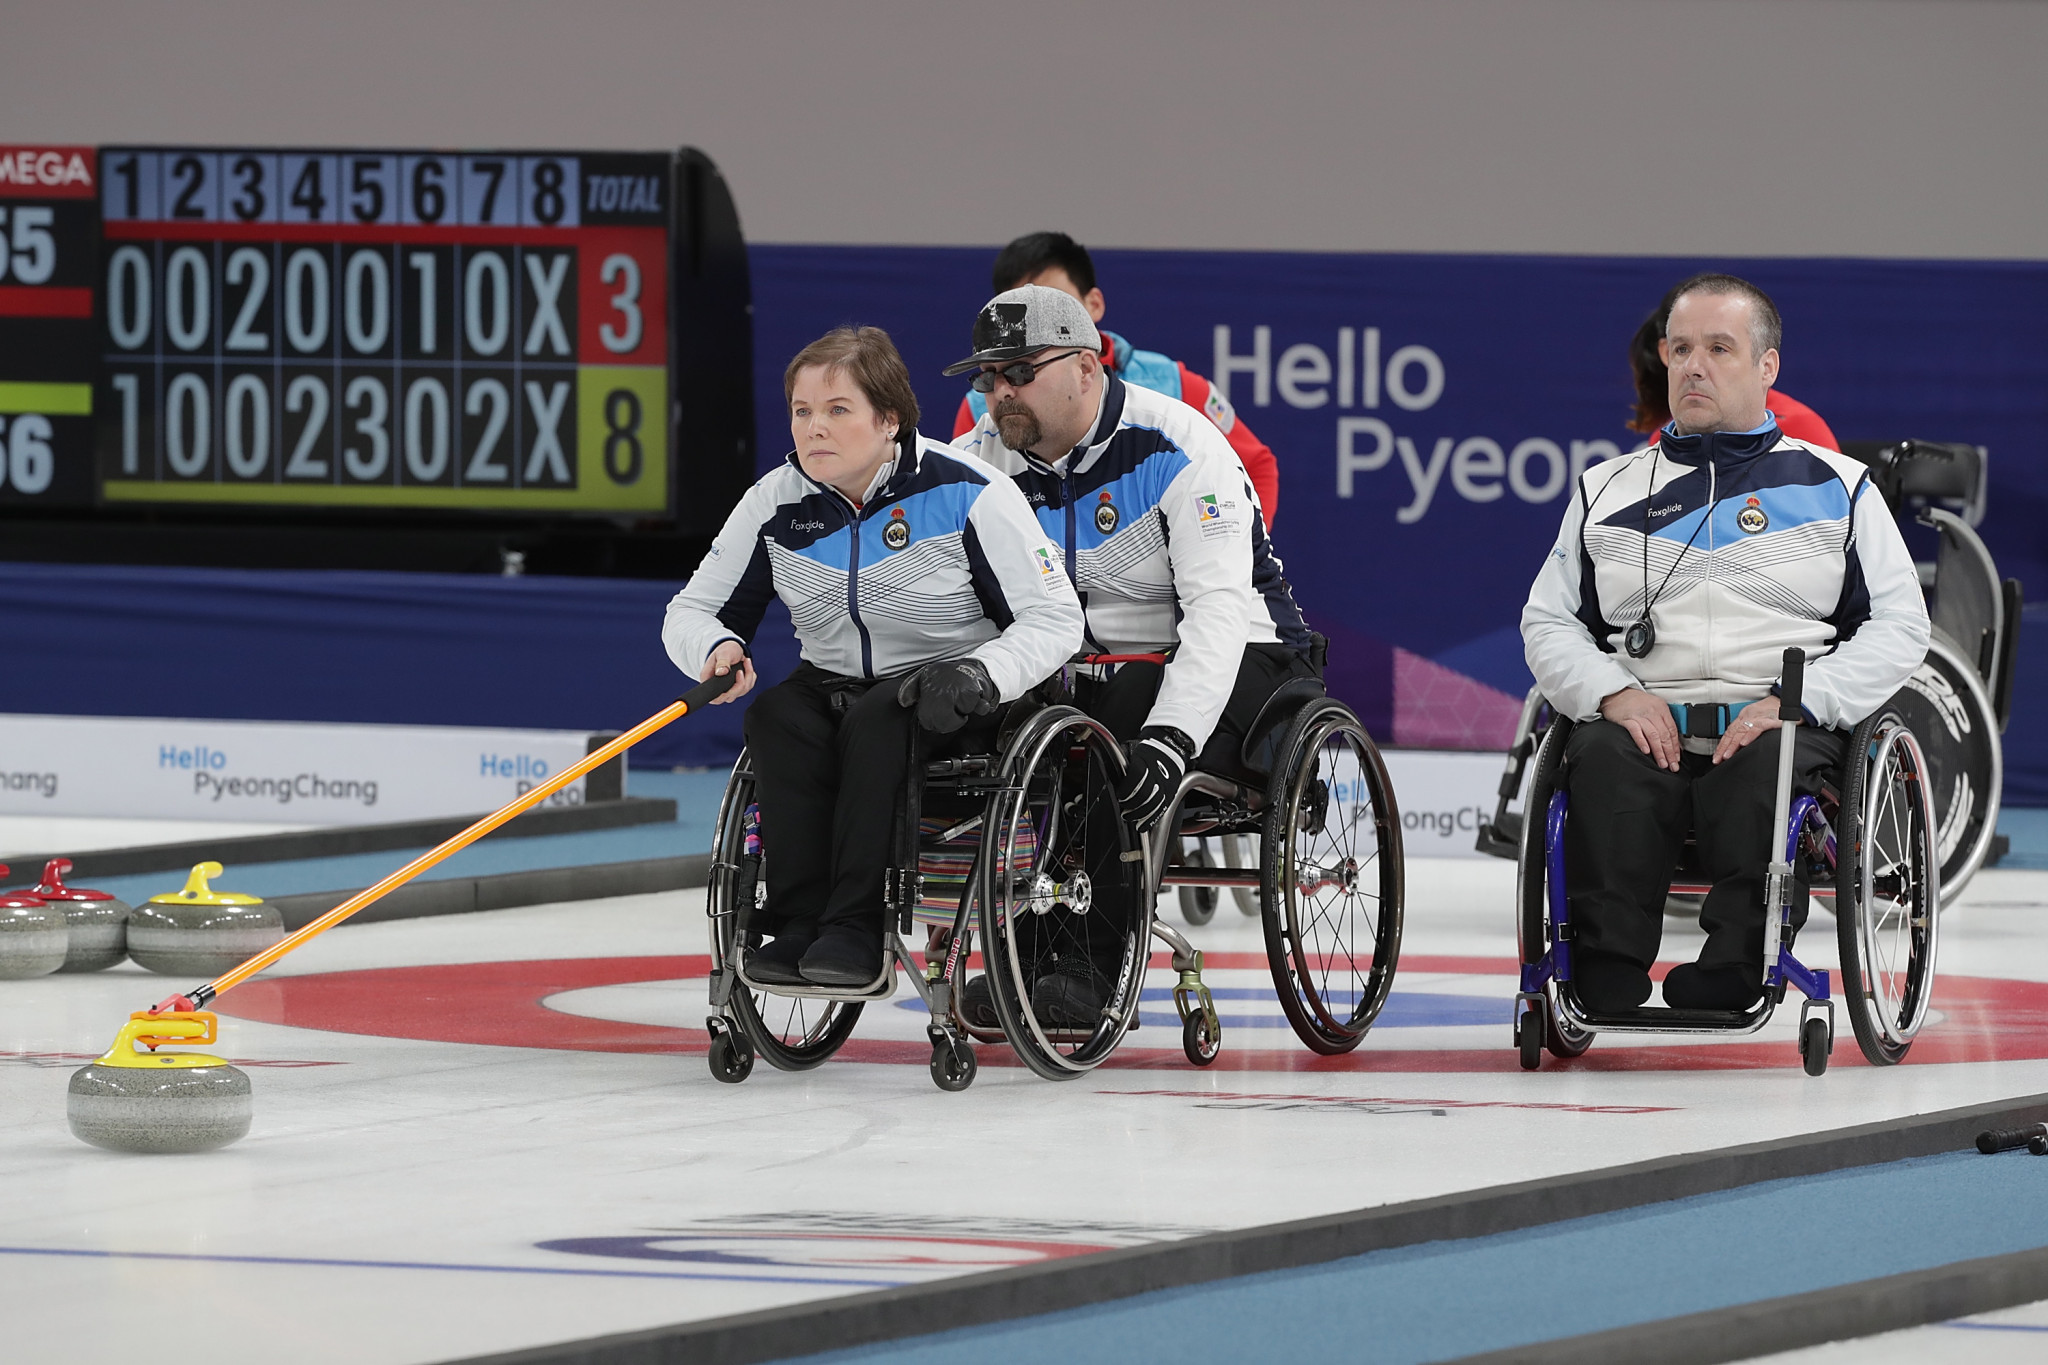 Scotland will be aiming to improve on a silver medal at the World Wheelchair Curling Championship in Wetzikon ©Getty Images